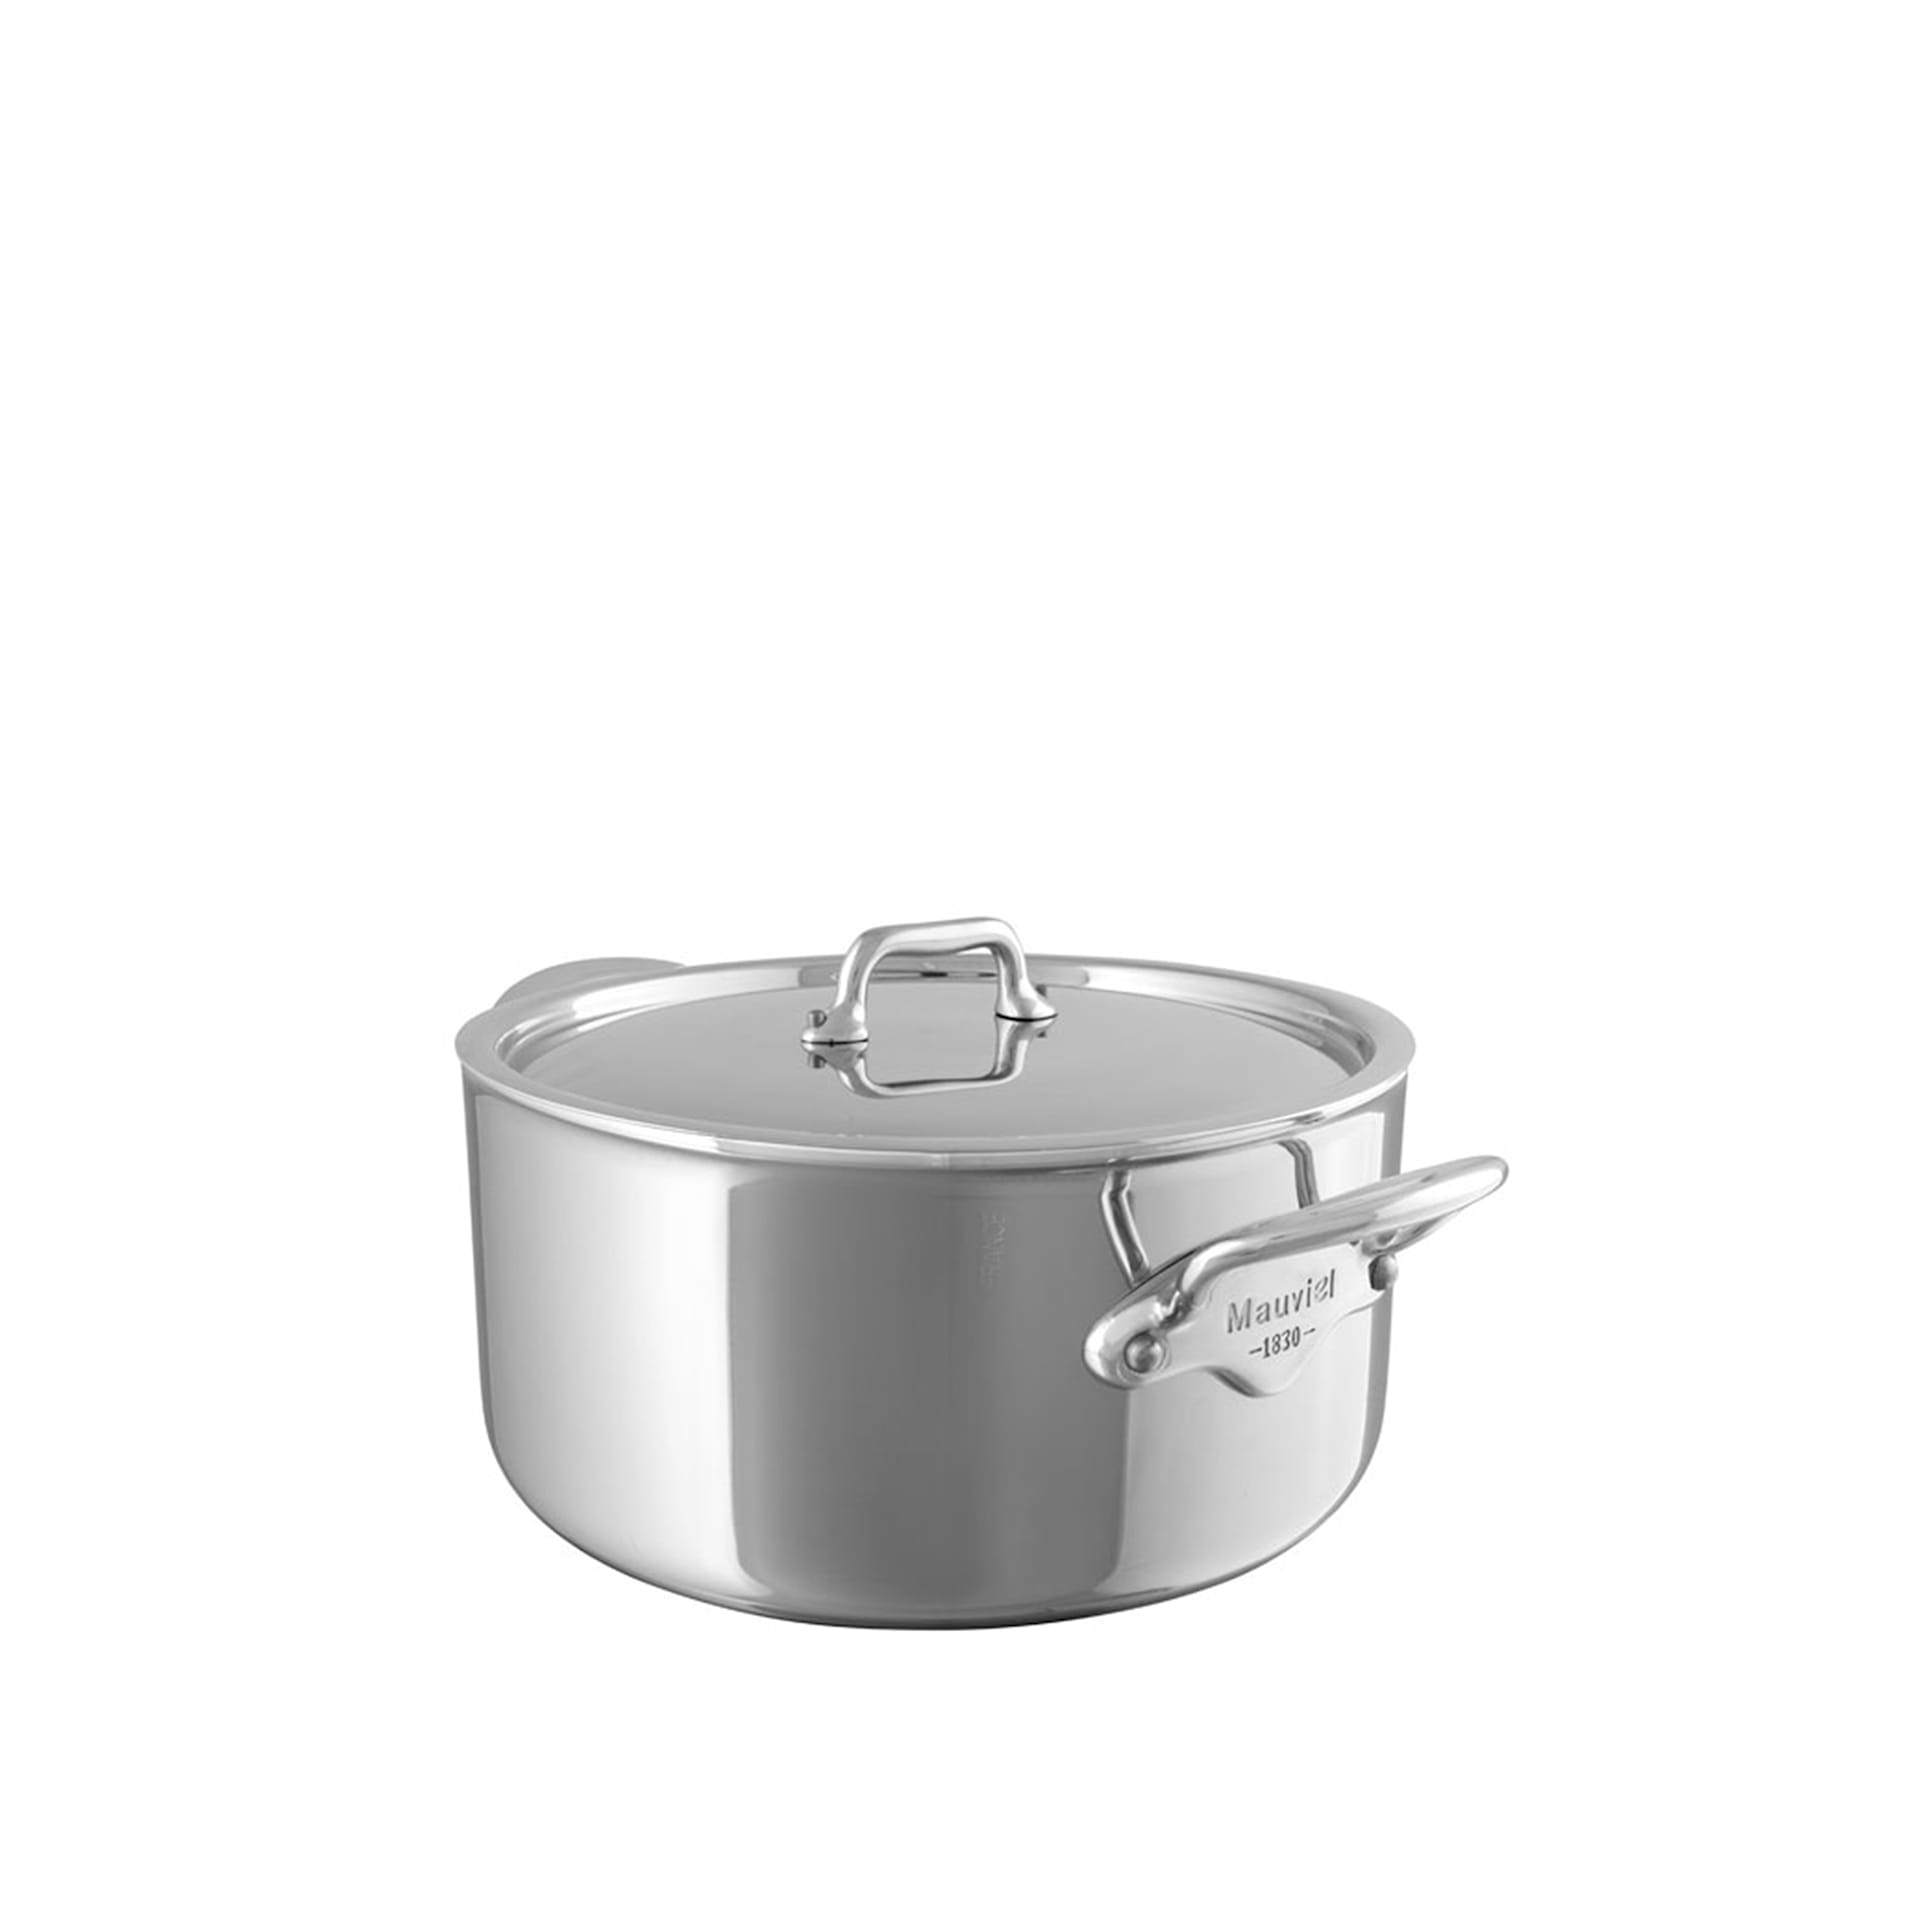 Pot With Lid Cook Style Steel 1,7 L - Mauviel - NO GA